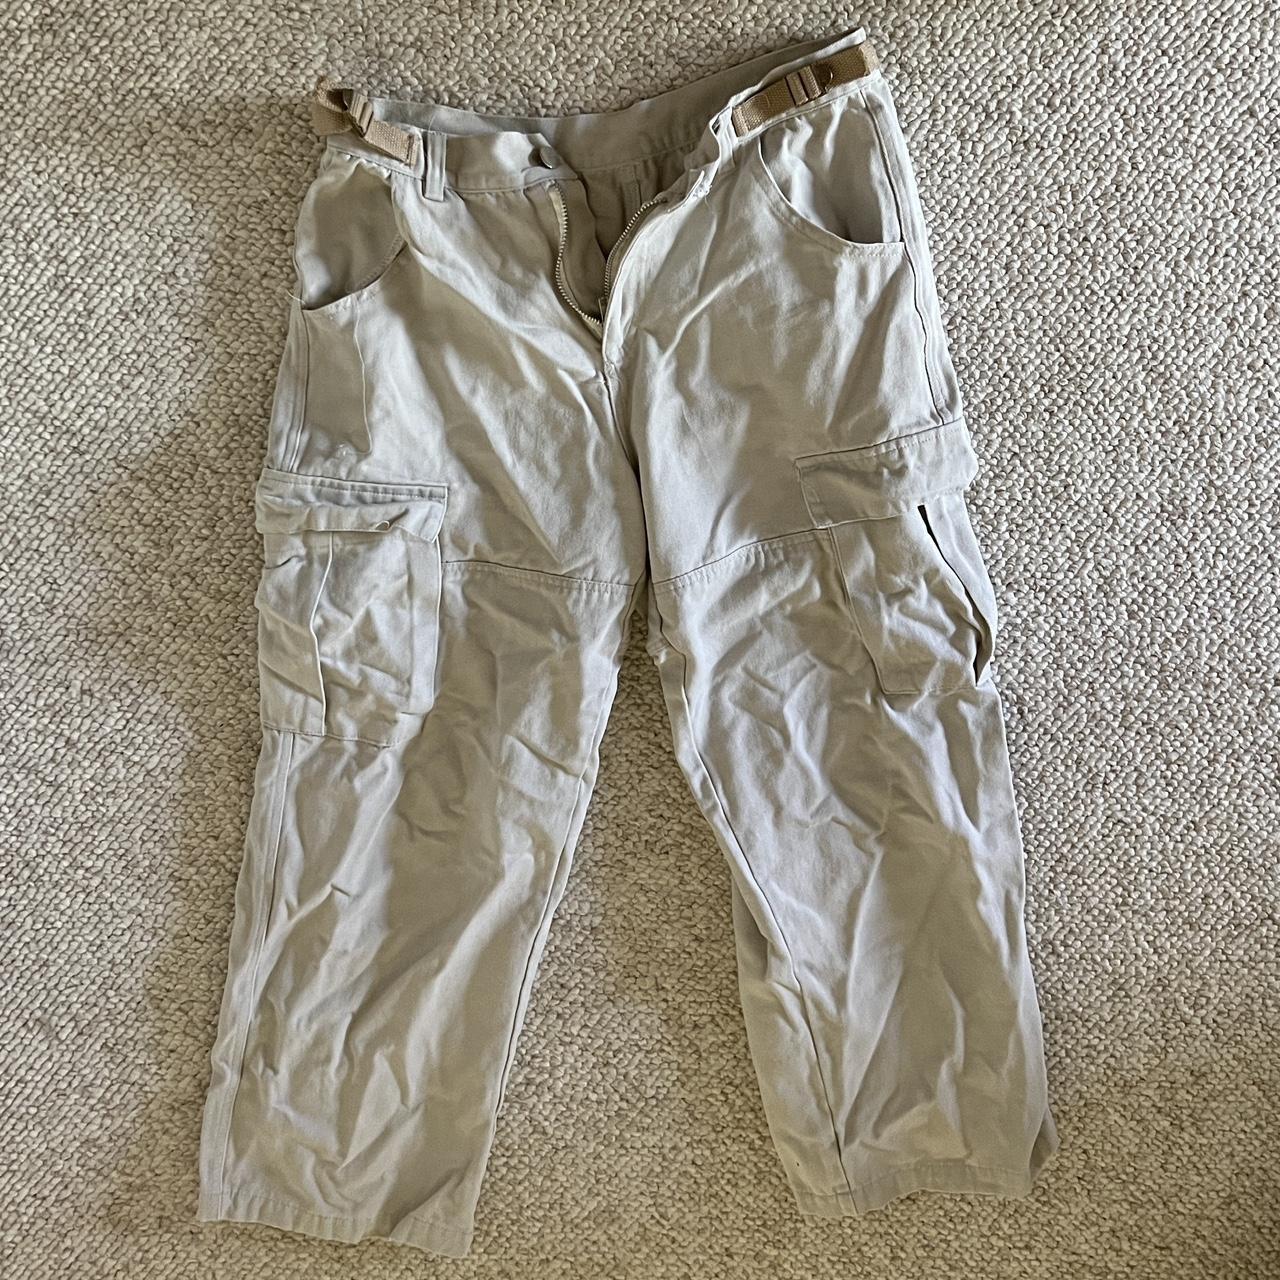 Apricot Men's Cream and White Trousers (2)